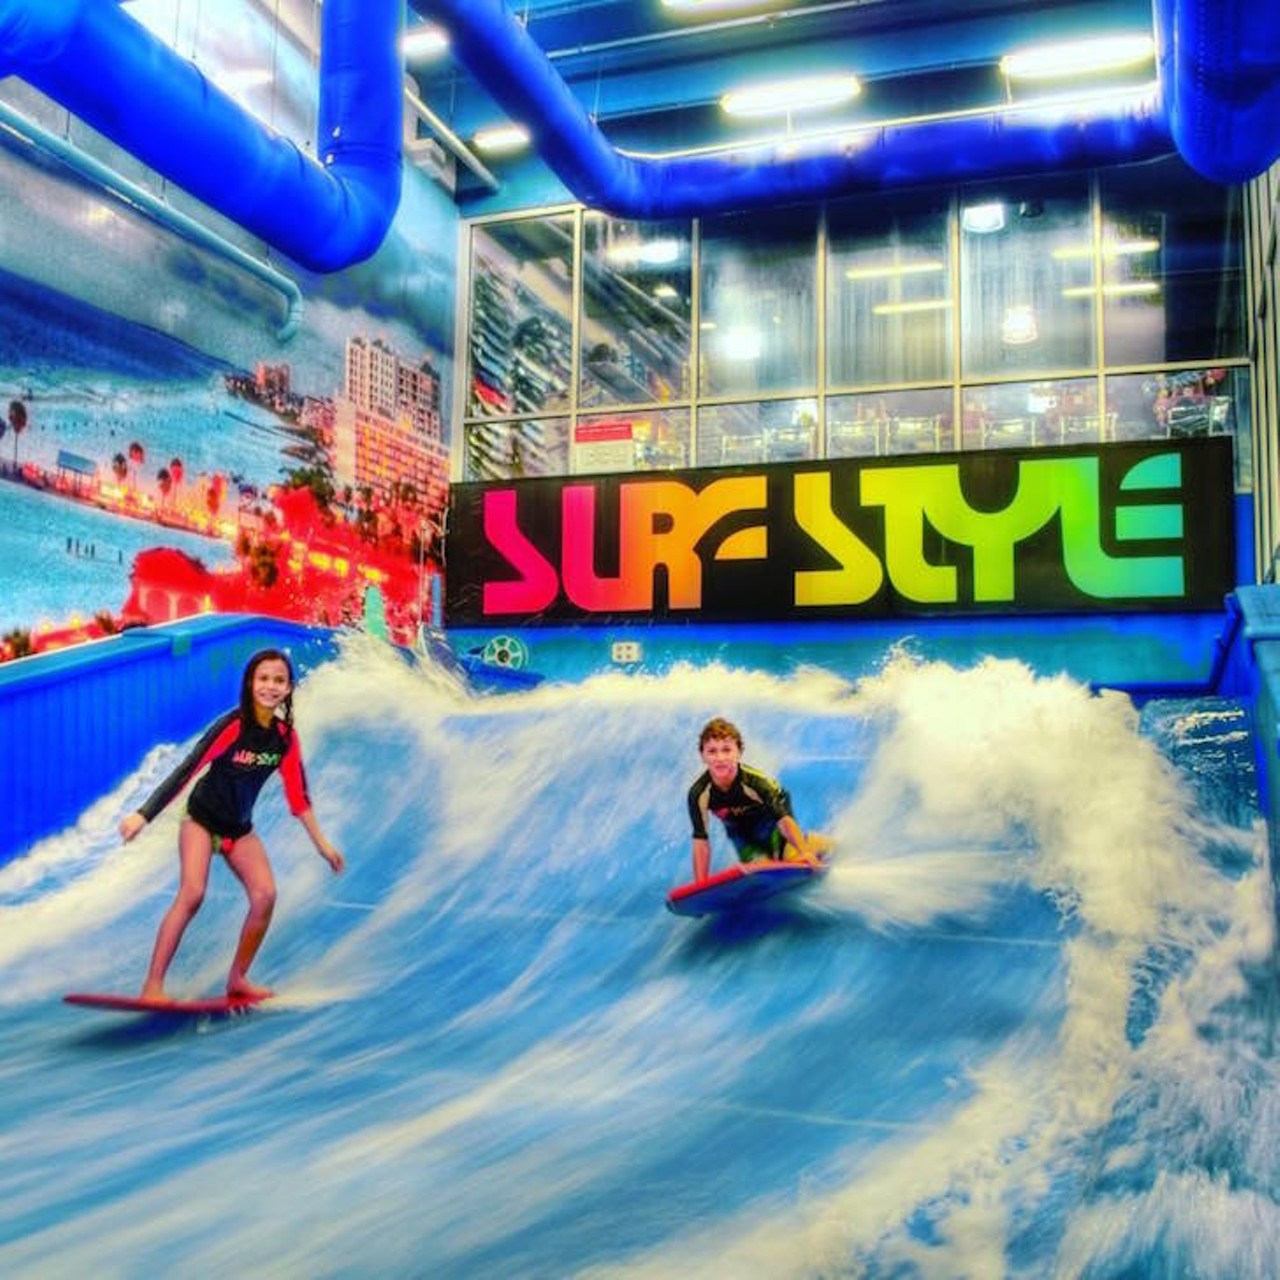 Hang 10 far away from the UV rays at Flowrider Indoor Surfing
Flowrider Indoor Surfing, multiple locationsflowrider.surfstyle.com 
If you want to catch a wave without coming home looking like a lobster, Flowrider Indoor Surfing will meet you in the middle. Their indoor wave simulator re-creates the surfing experience in a controlled environment where instructors are standing by to make sure all experience levels are safe.
Photo via Surf Style/Facebook